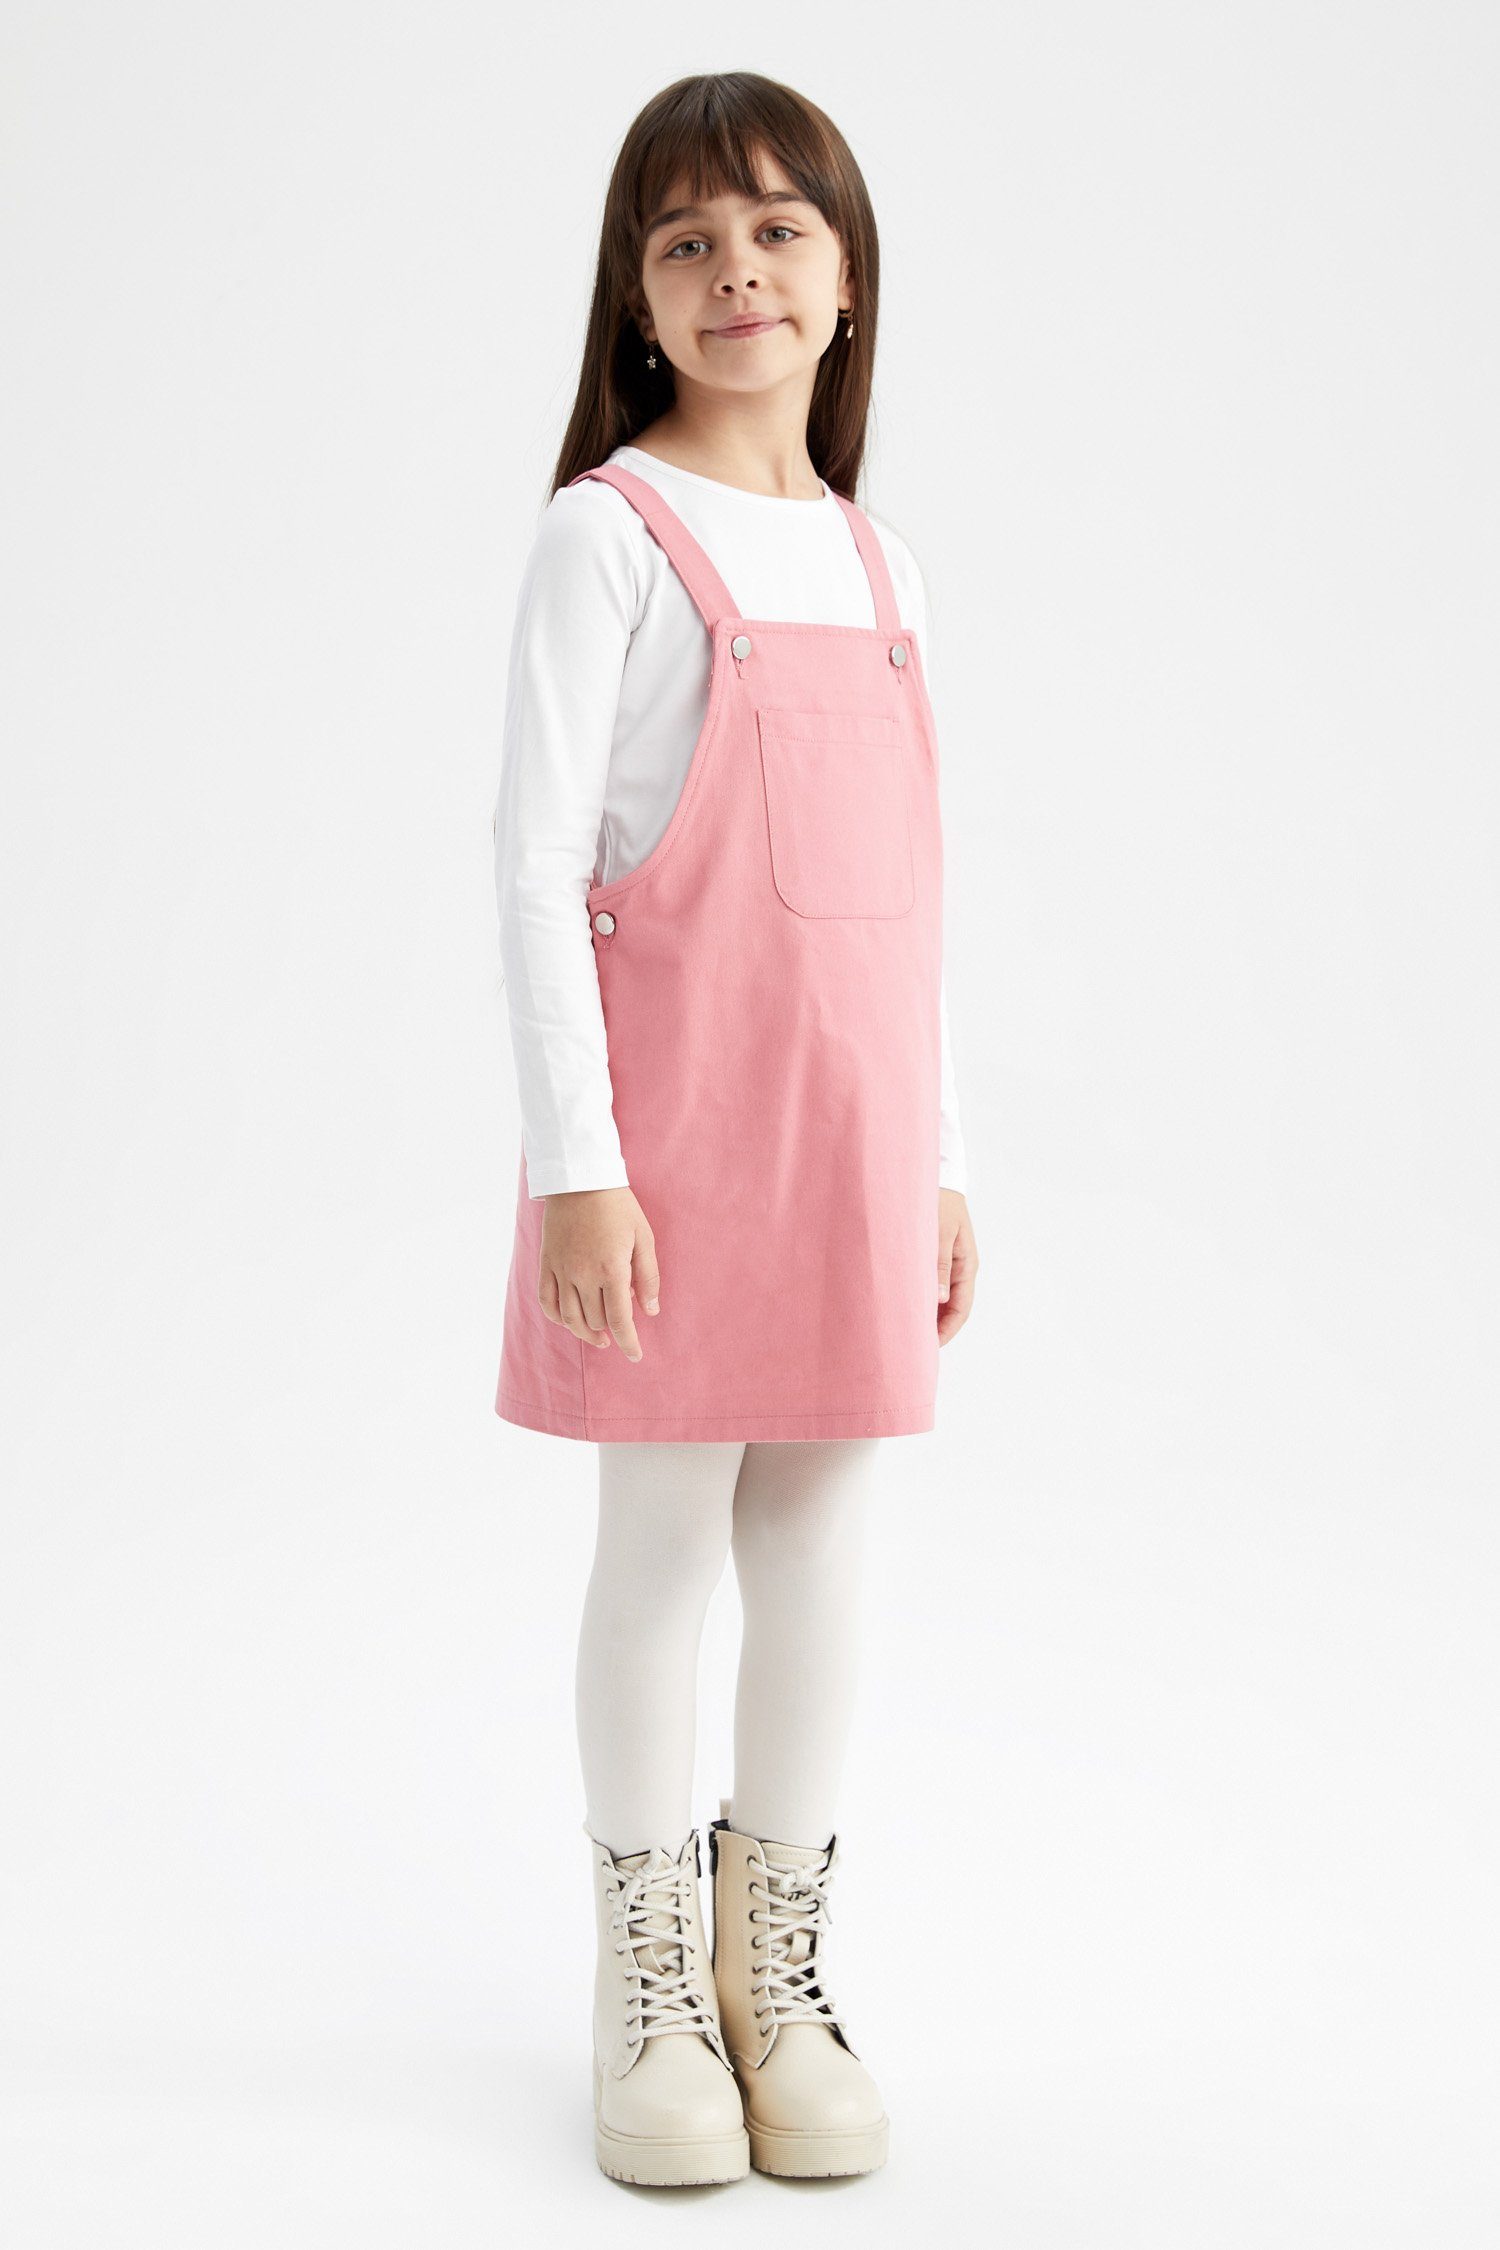 DeFacto Overall Mädchen Overall